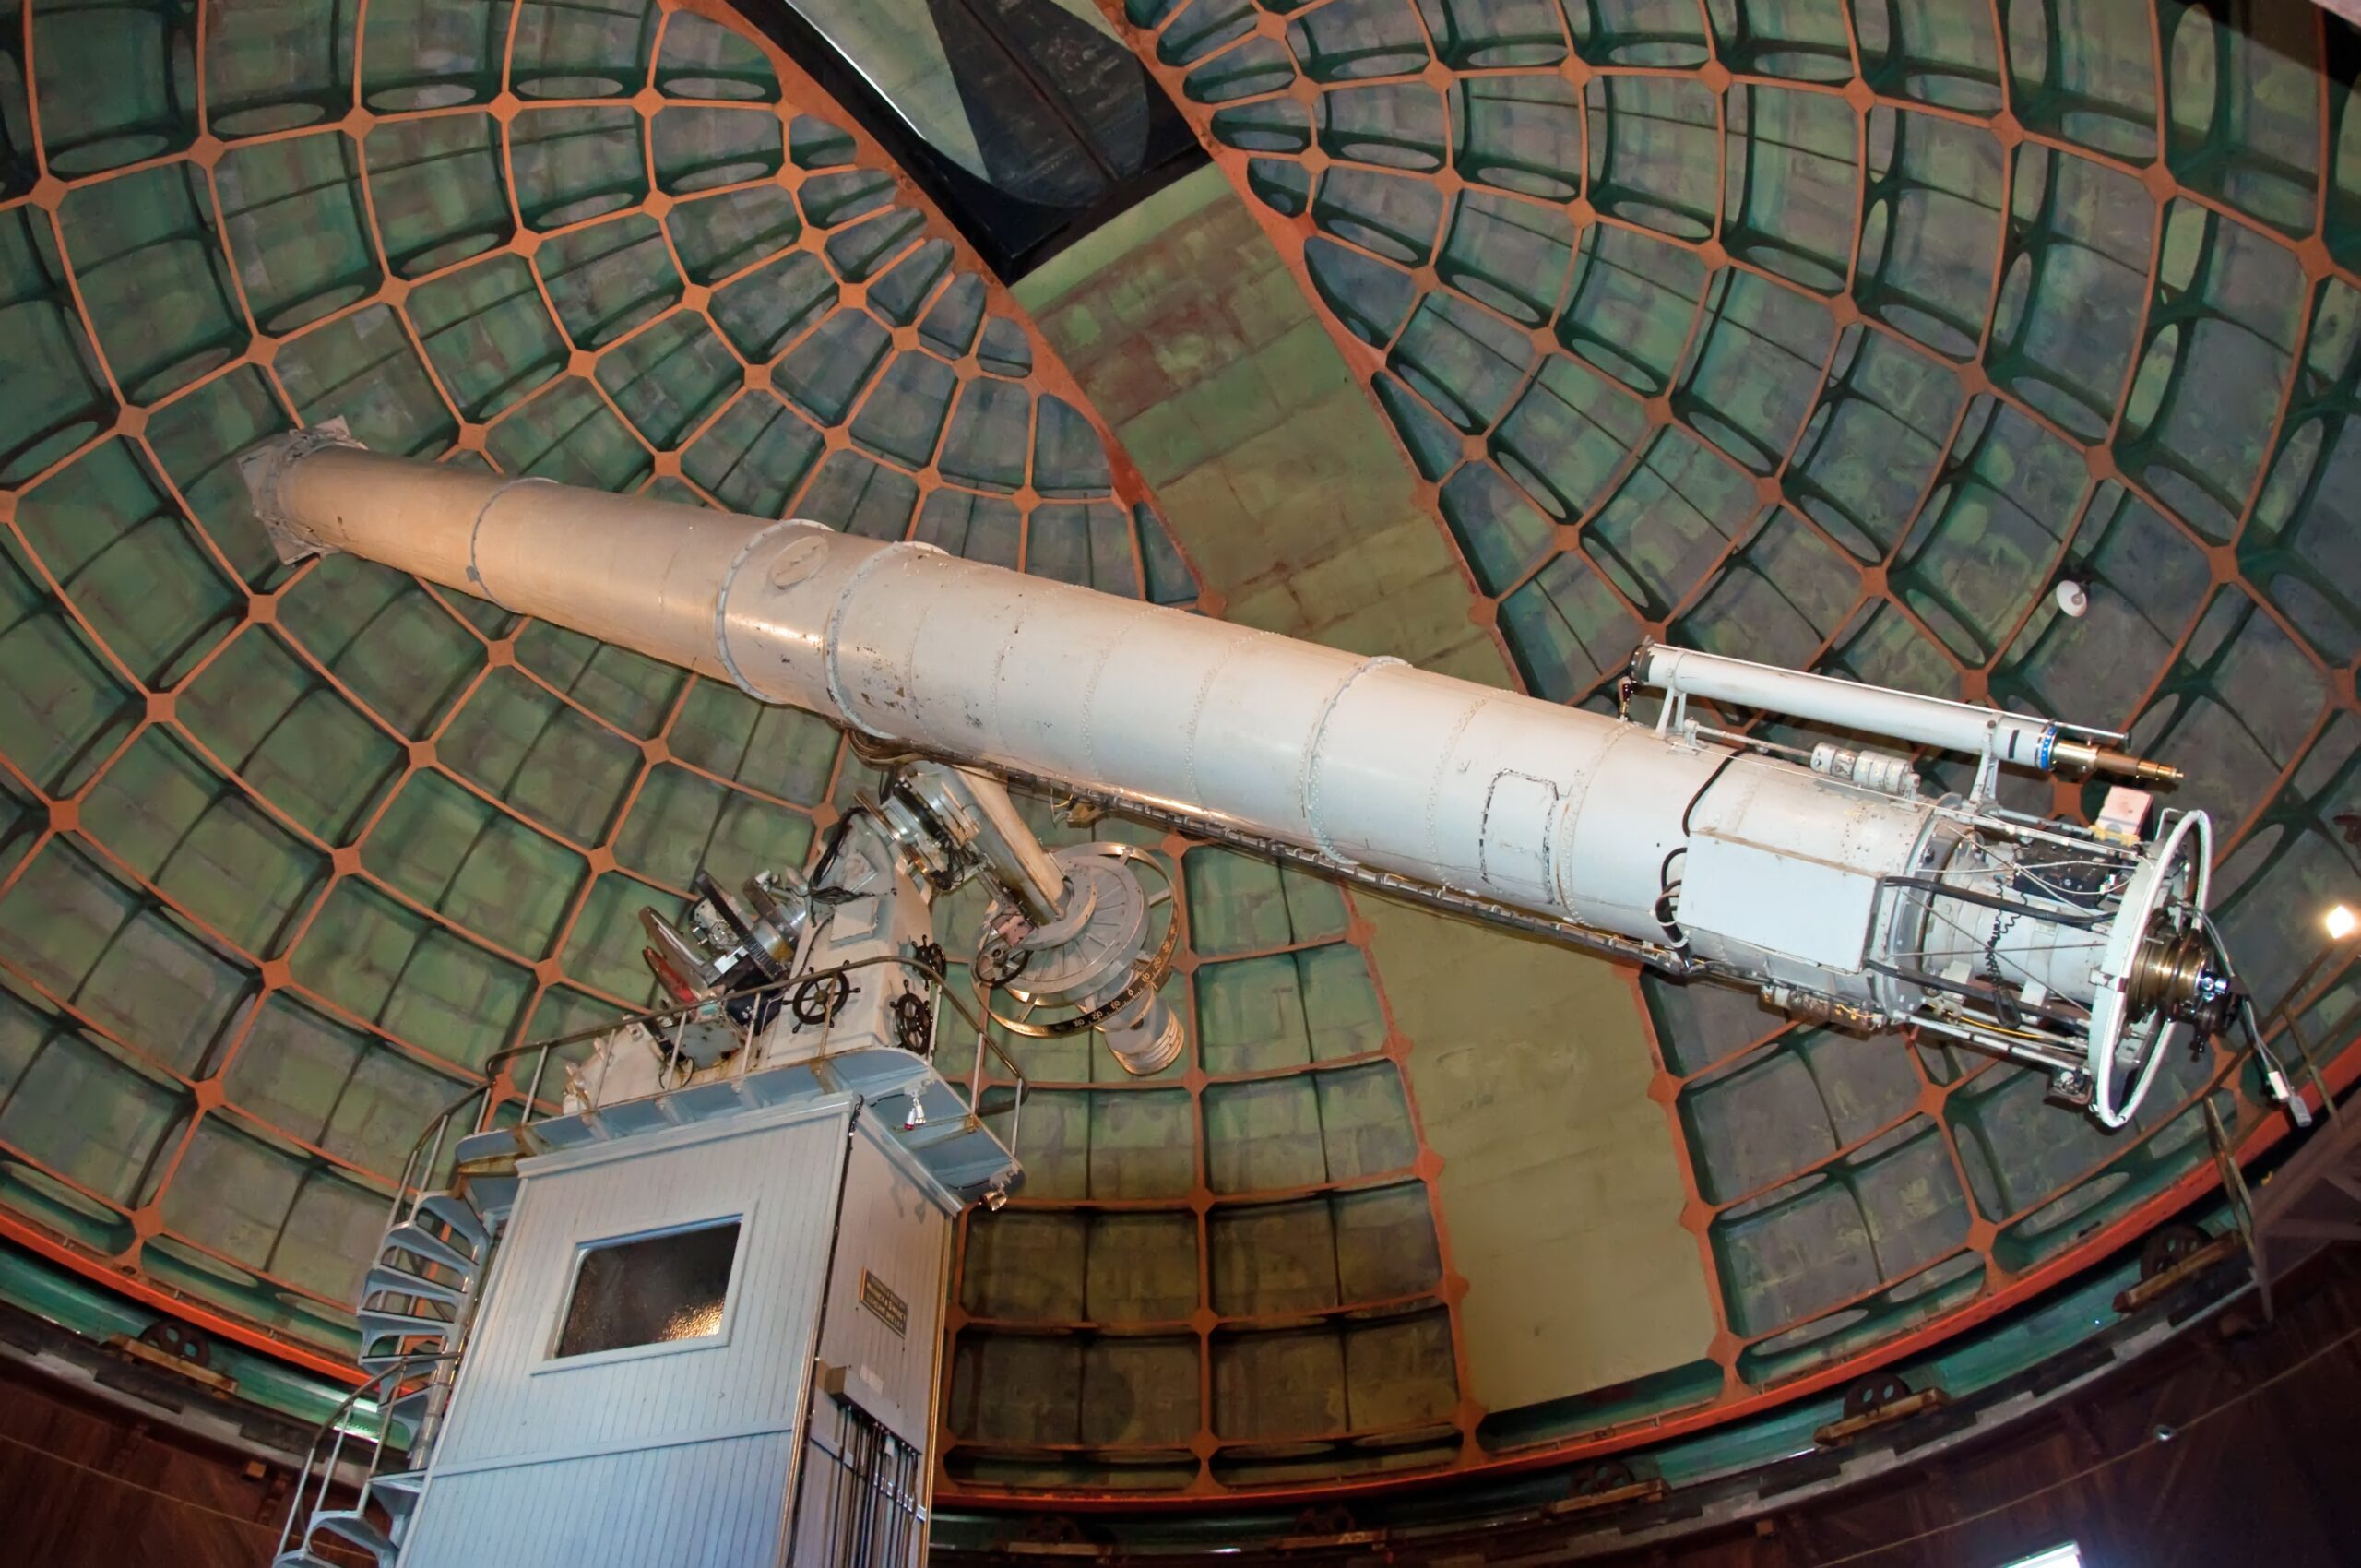 The Yerkes Observatory telescope lens is 40 inches in diameter, the largest refracting telescope ever built.